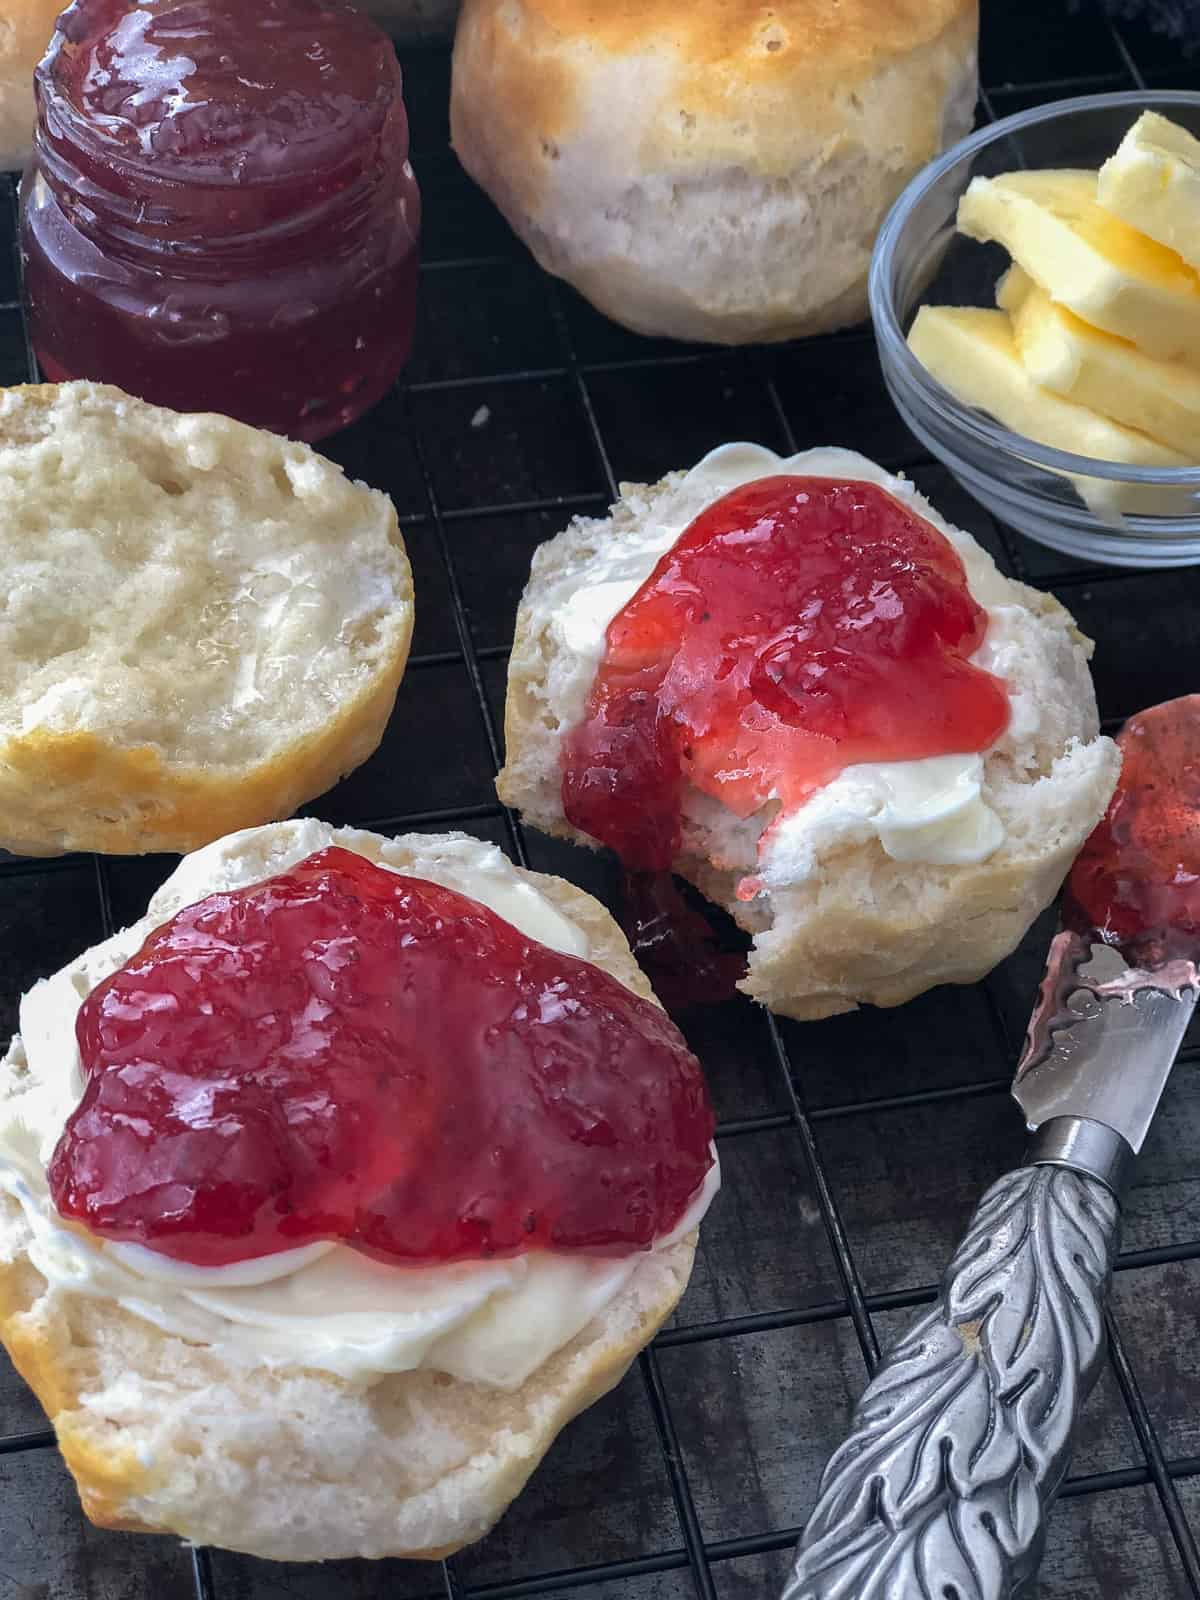 Homemade flaky biscuits covered in butter and jam on a plate.